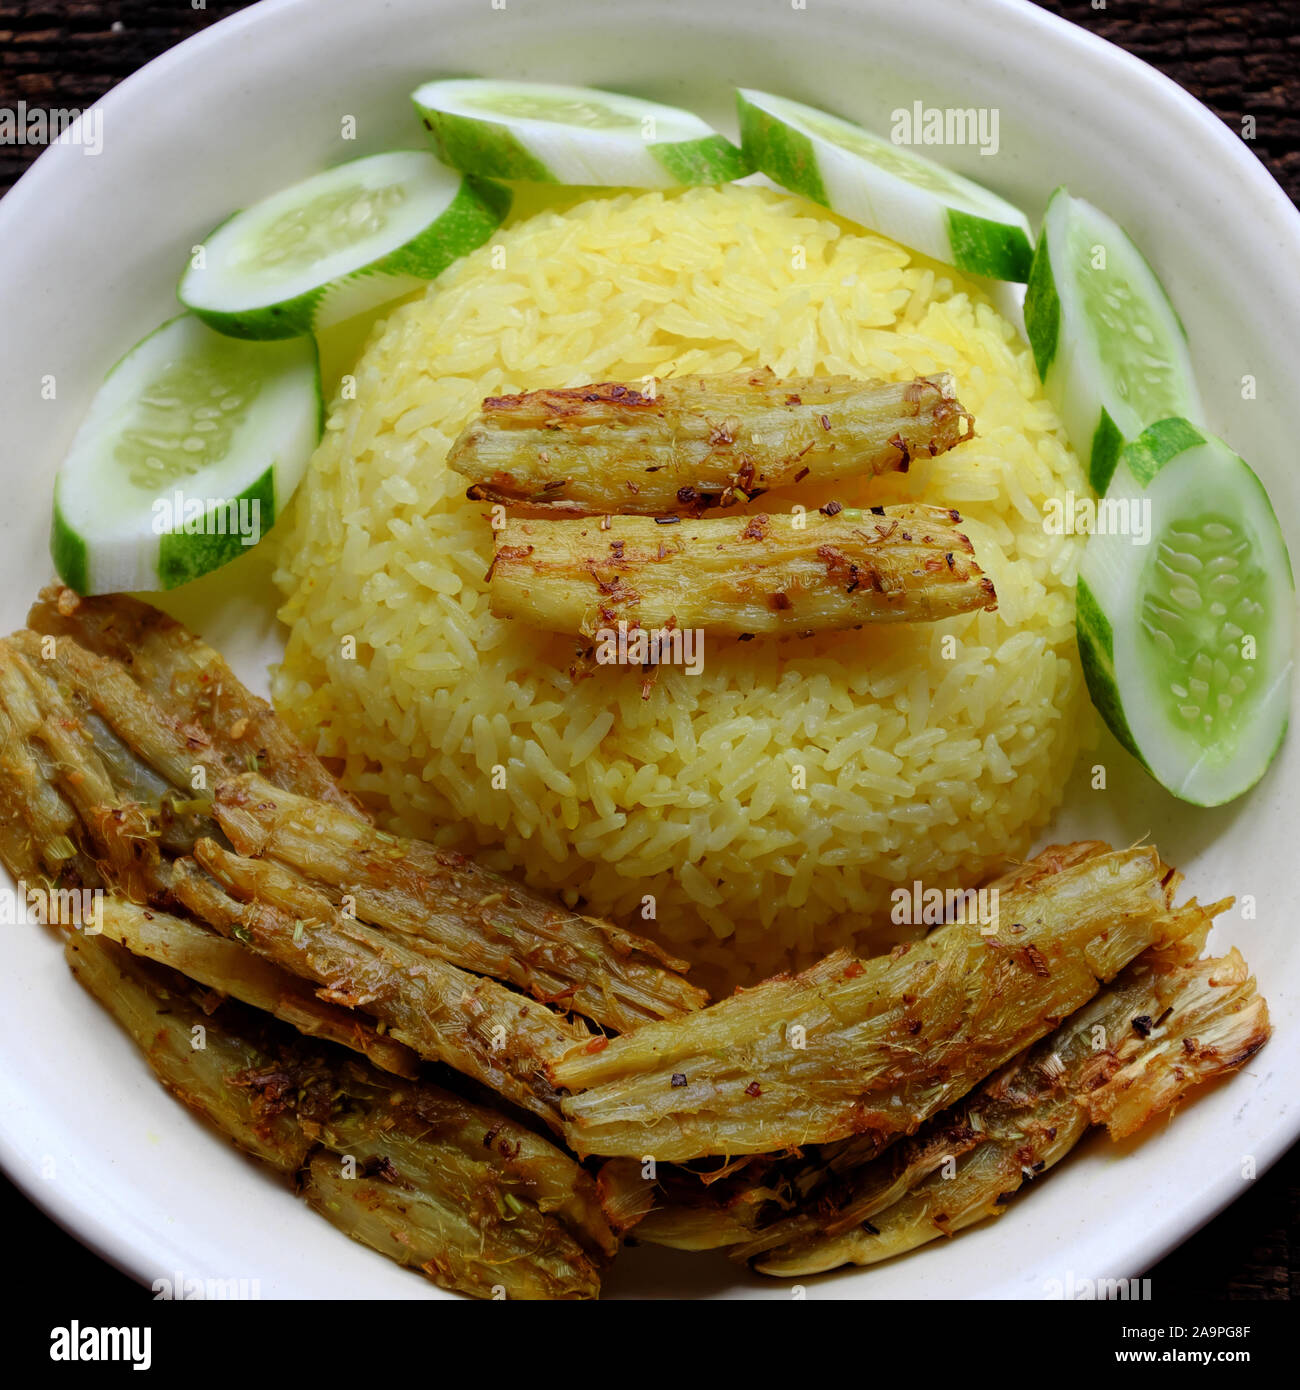 Vietnamese cuisine, vegan dish from vegetables, arrowroot marinated in salt, citronella, deep fried, delicious vegetarian meal rice dish for dinner Stock Photo